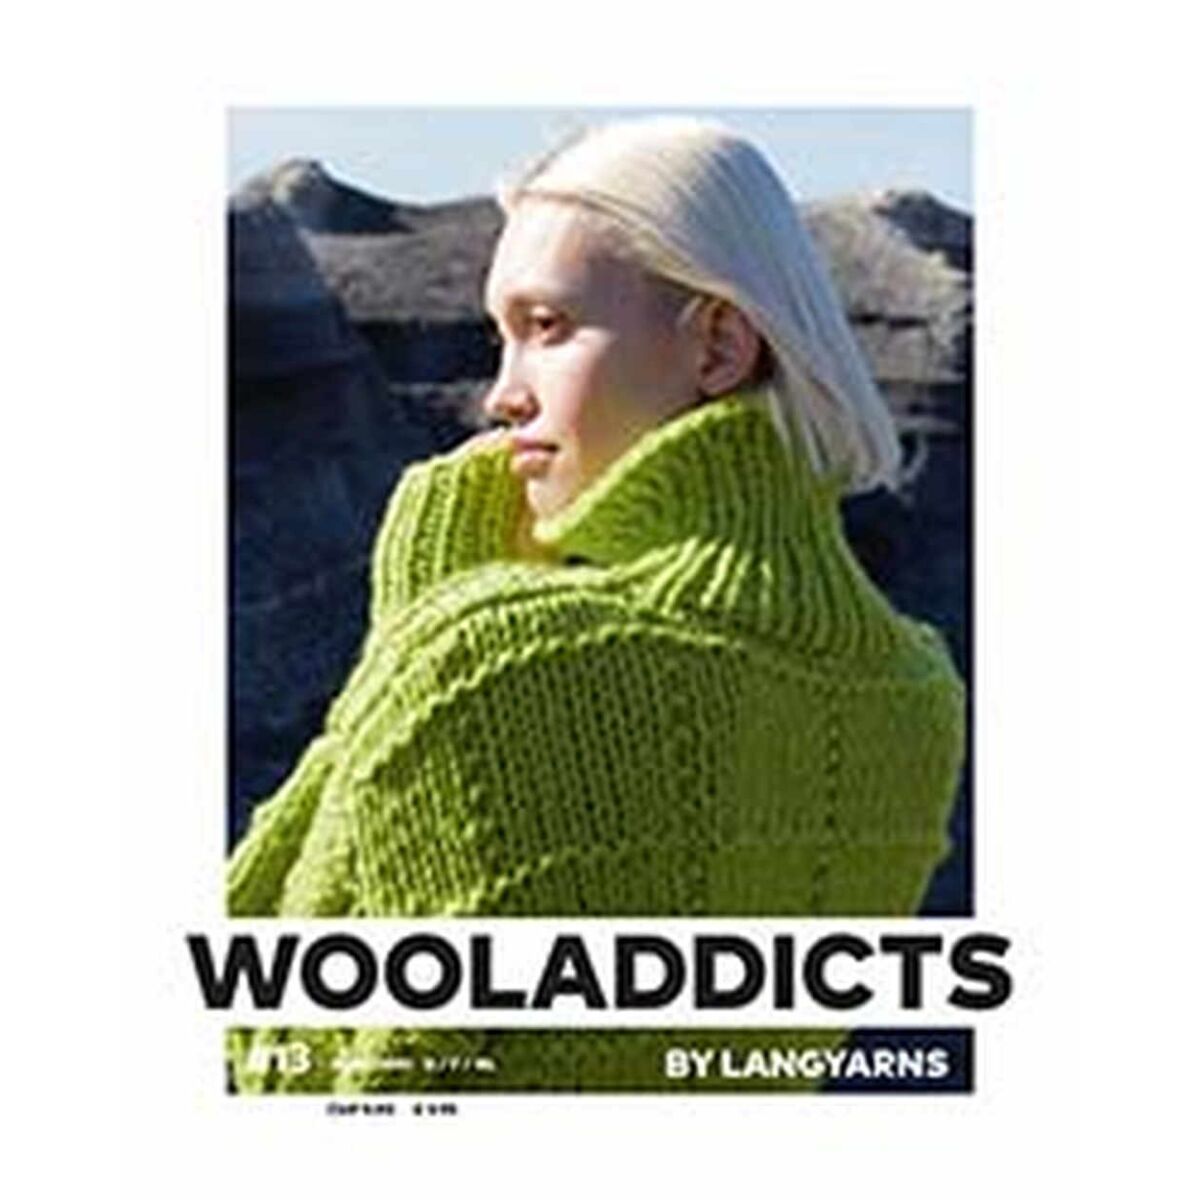 LANG YARNS WOOLADDICTS #13 LY.20860001 Zeitschriften